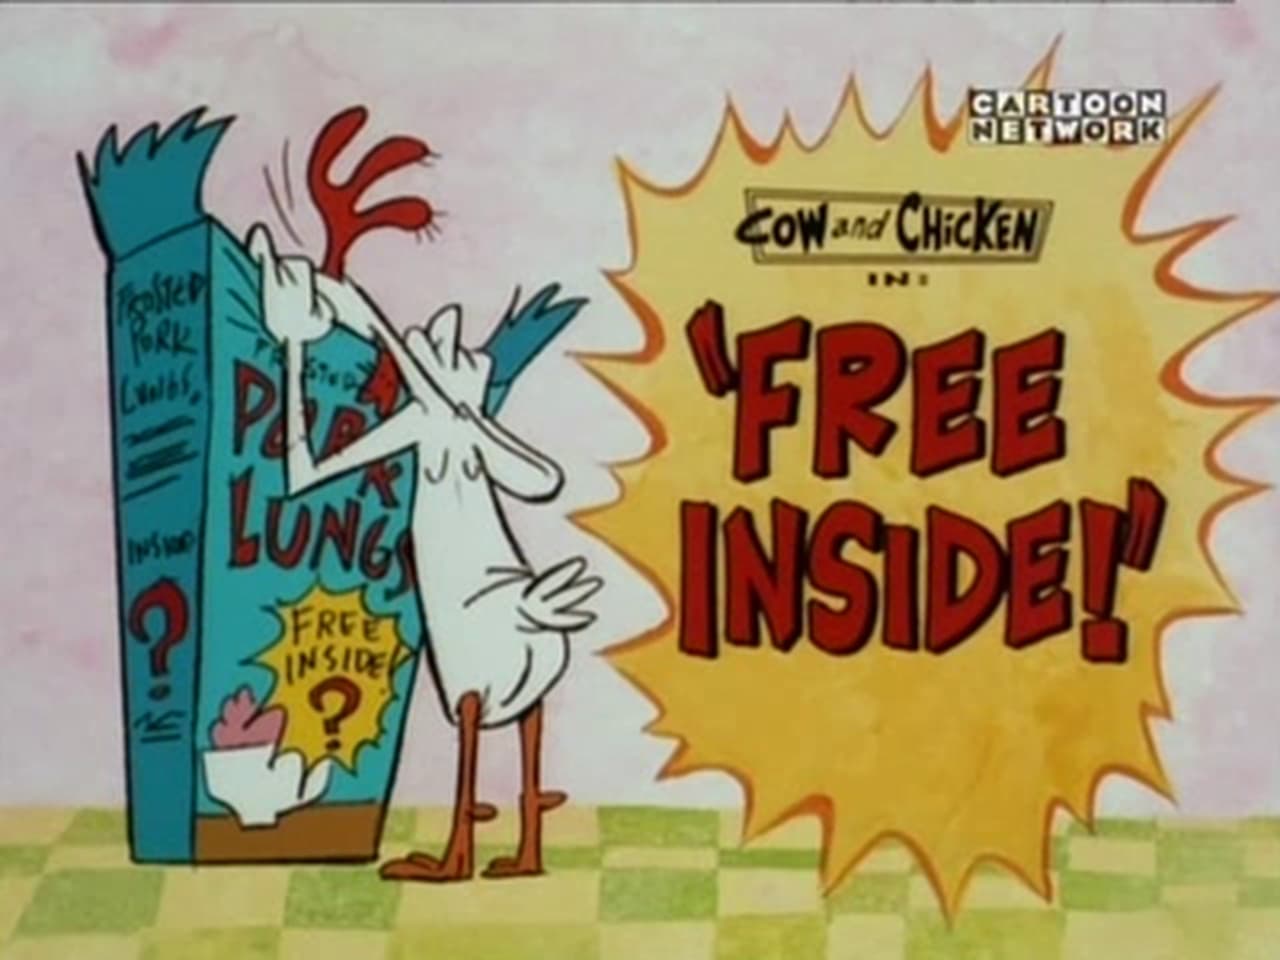 Cow and Chicken - Season 2 Episode 15 : Free Inside